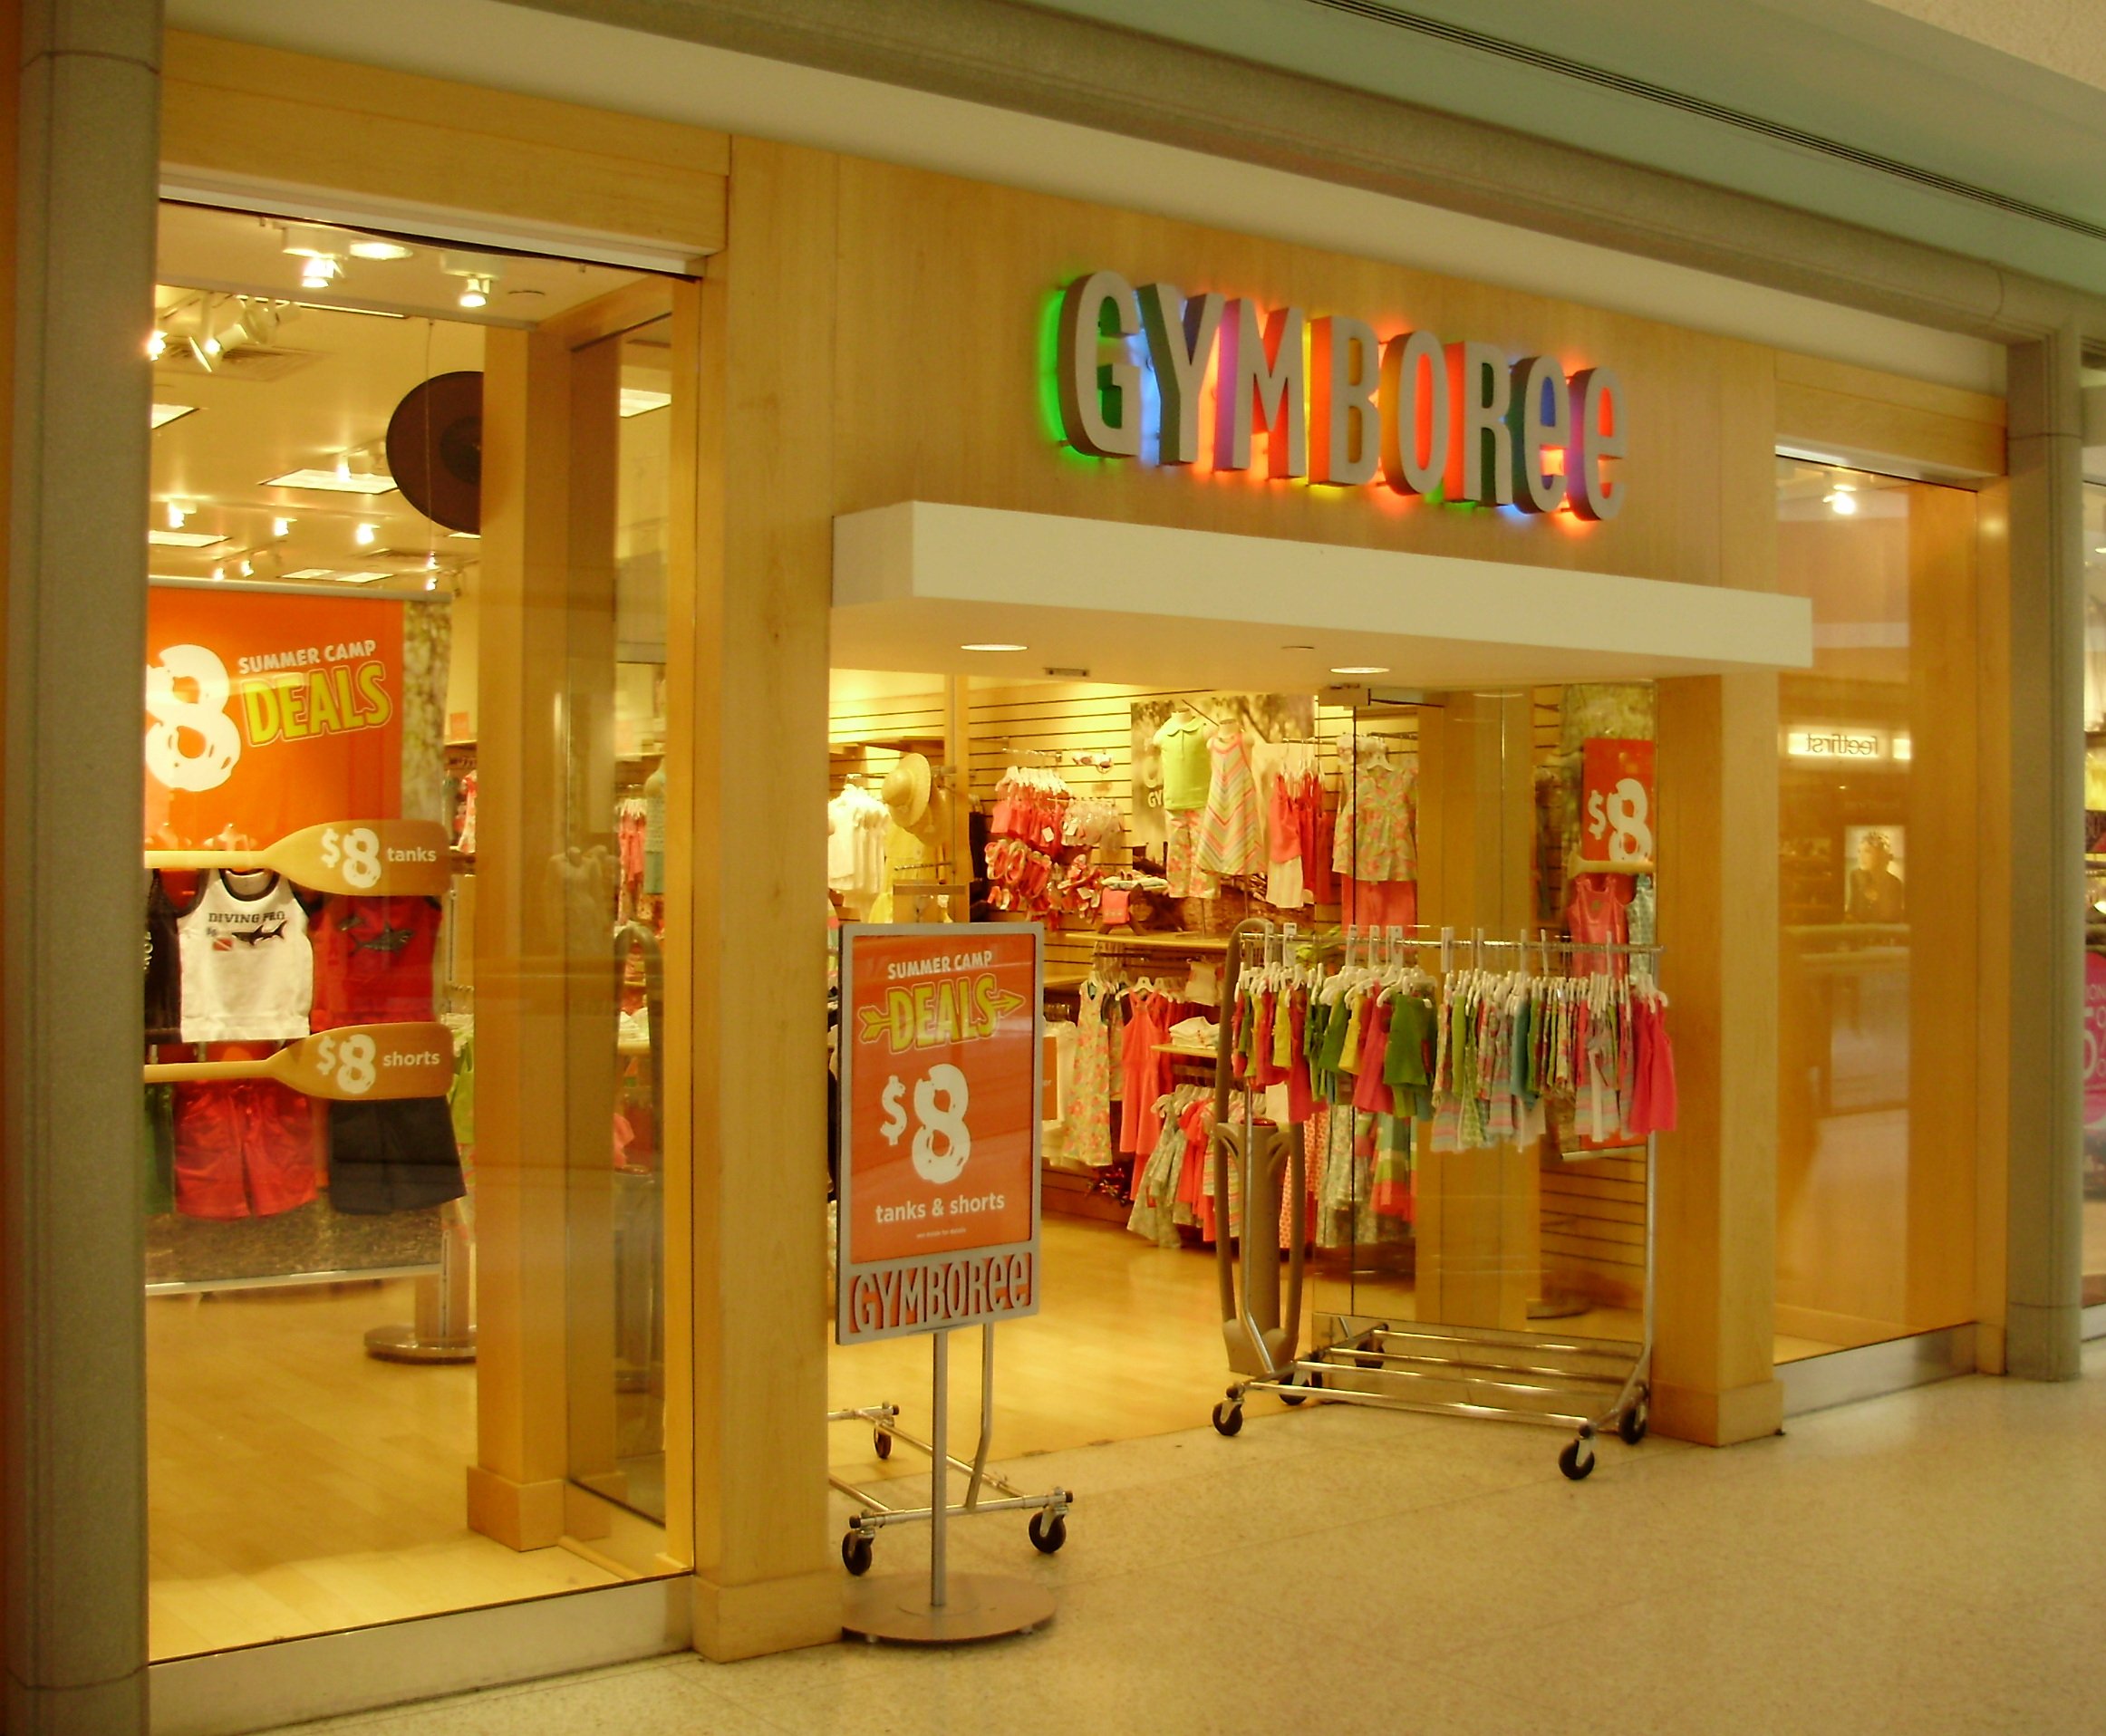 Take 50% off clearance at Gymboree